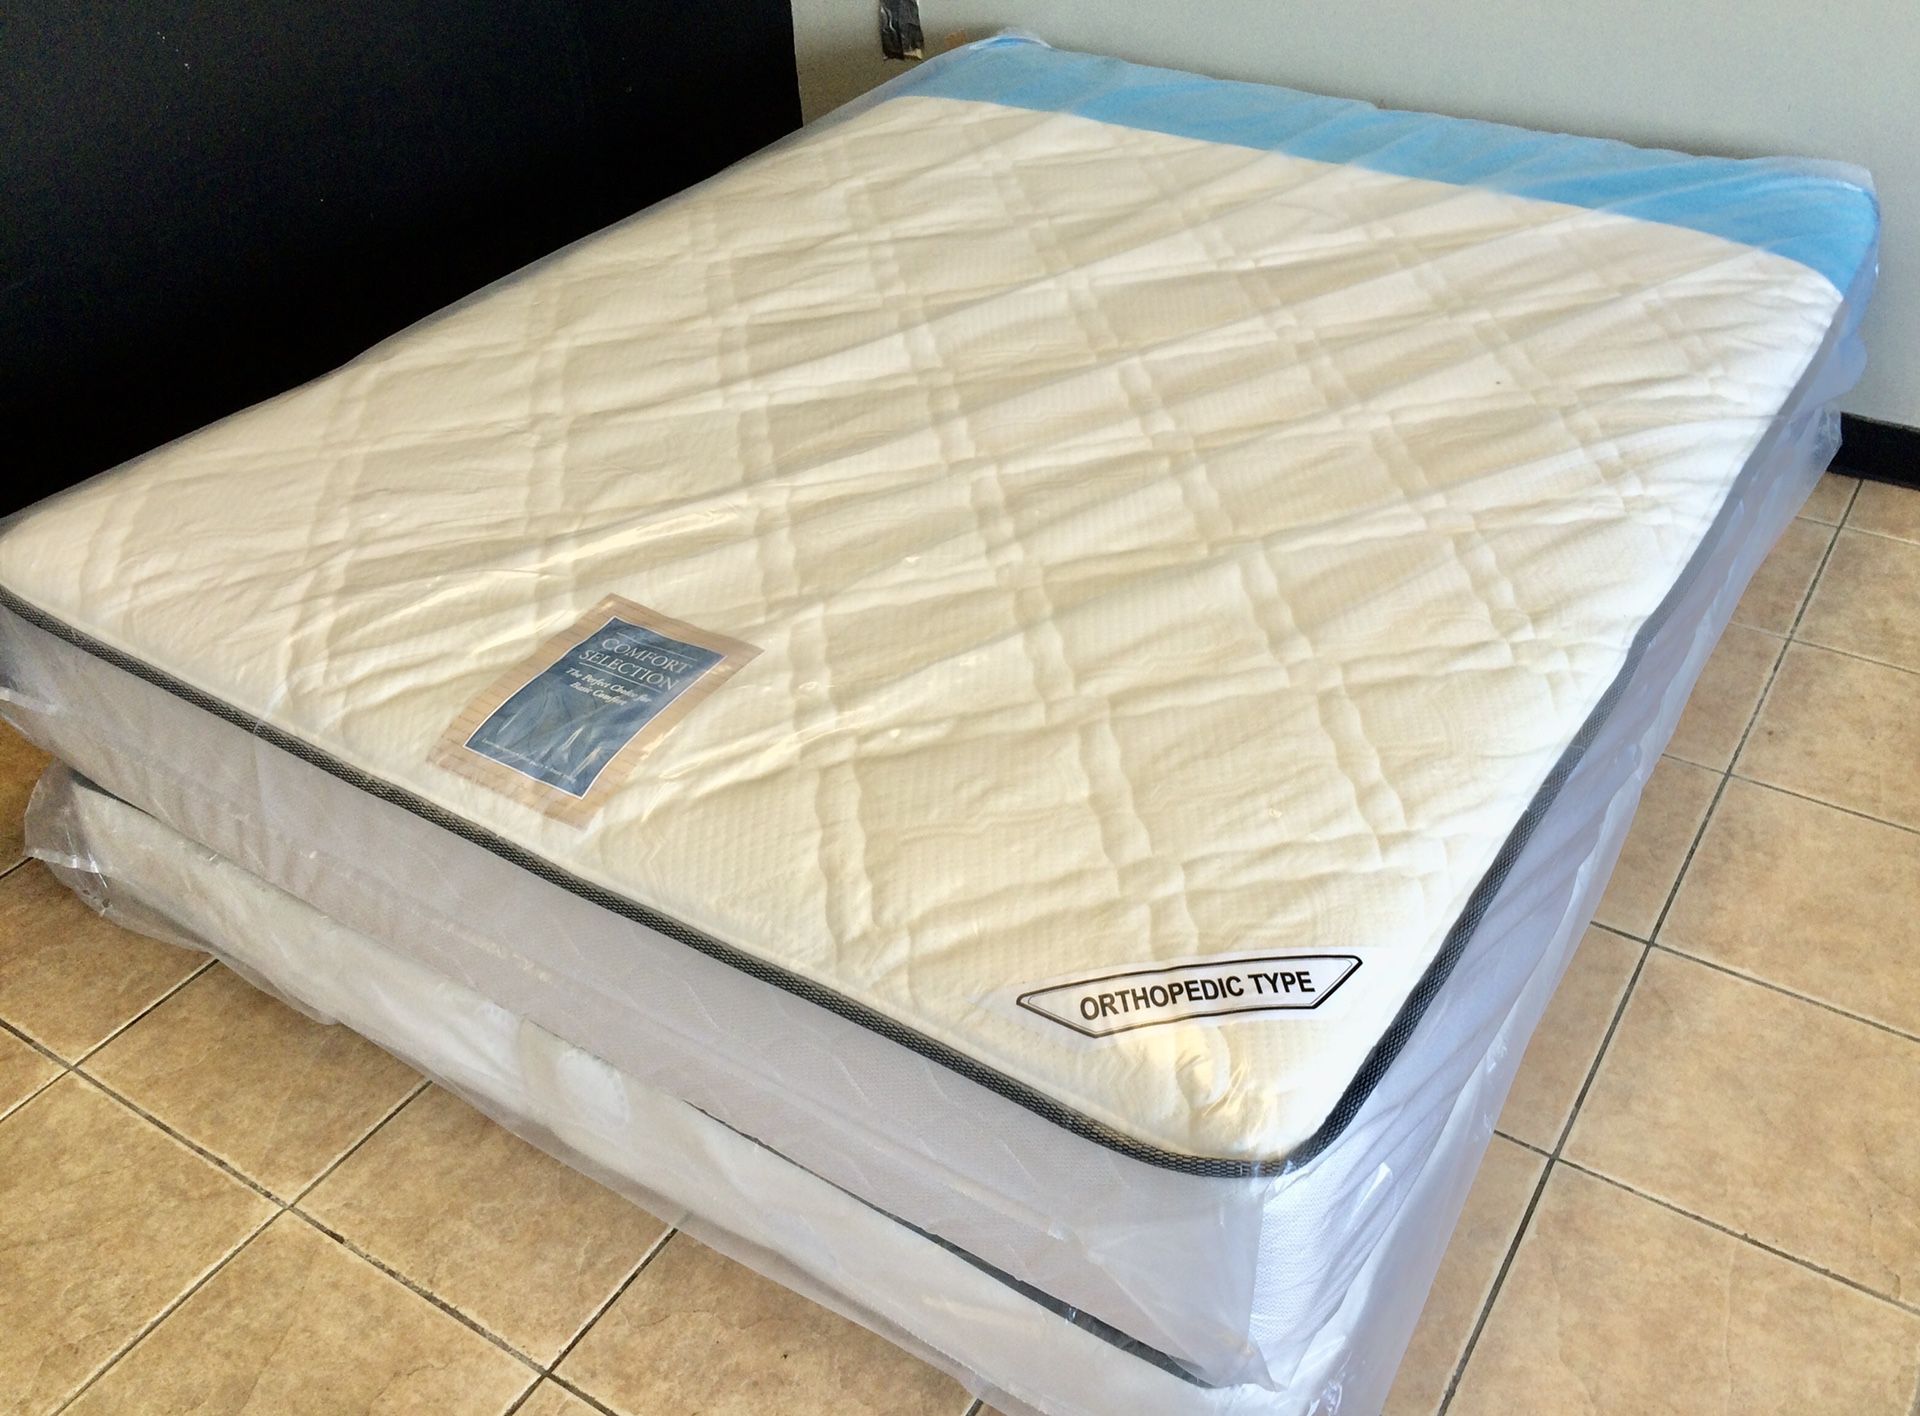 Brand New Thick Full Size Or Queen Size Mattress Orthopedic > Very Good For Back Pain Relief , Delivery Available 🚚🚚